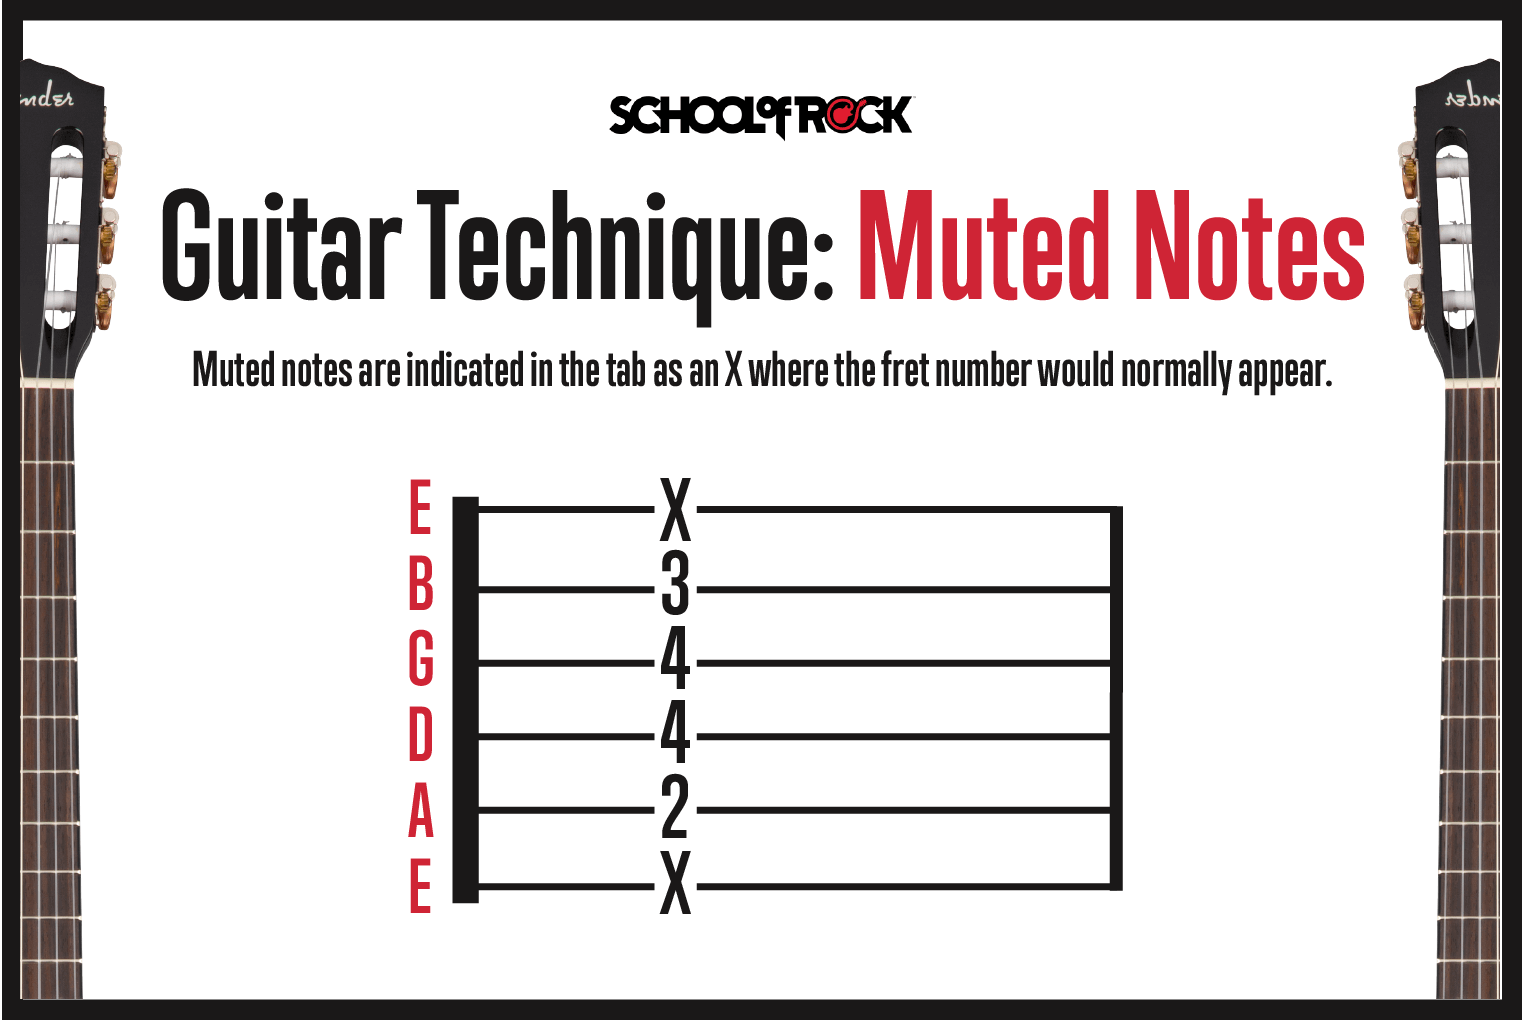 Guitar technique muted notes